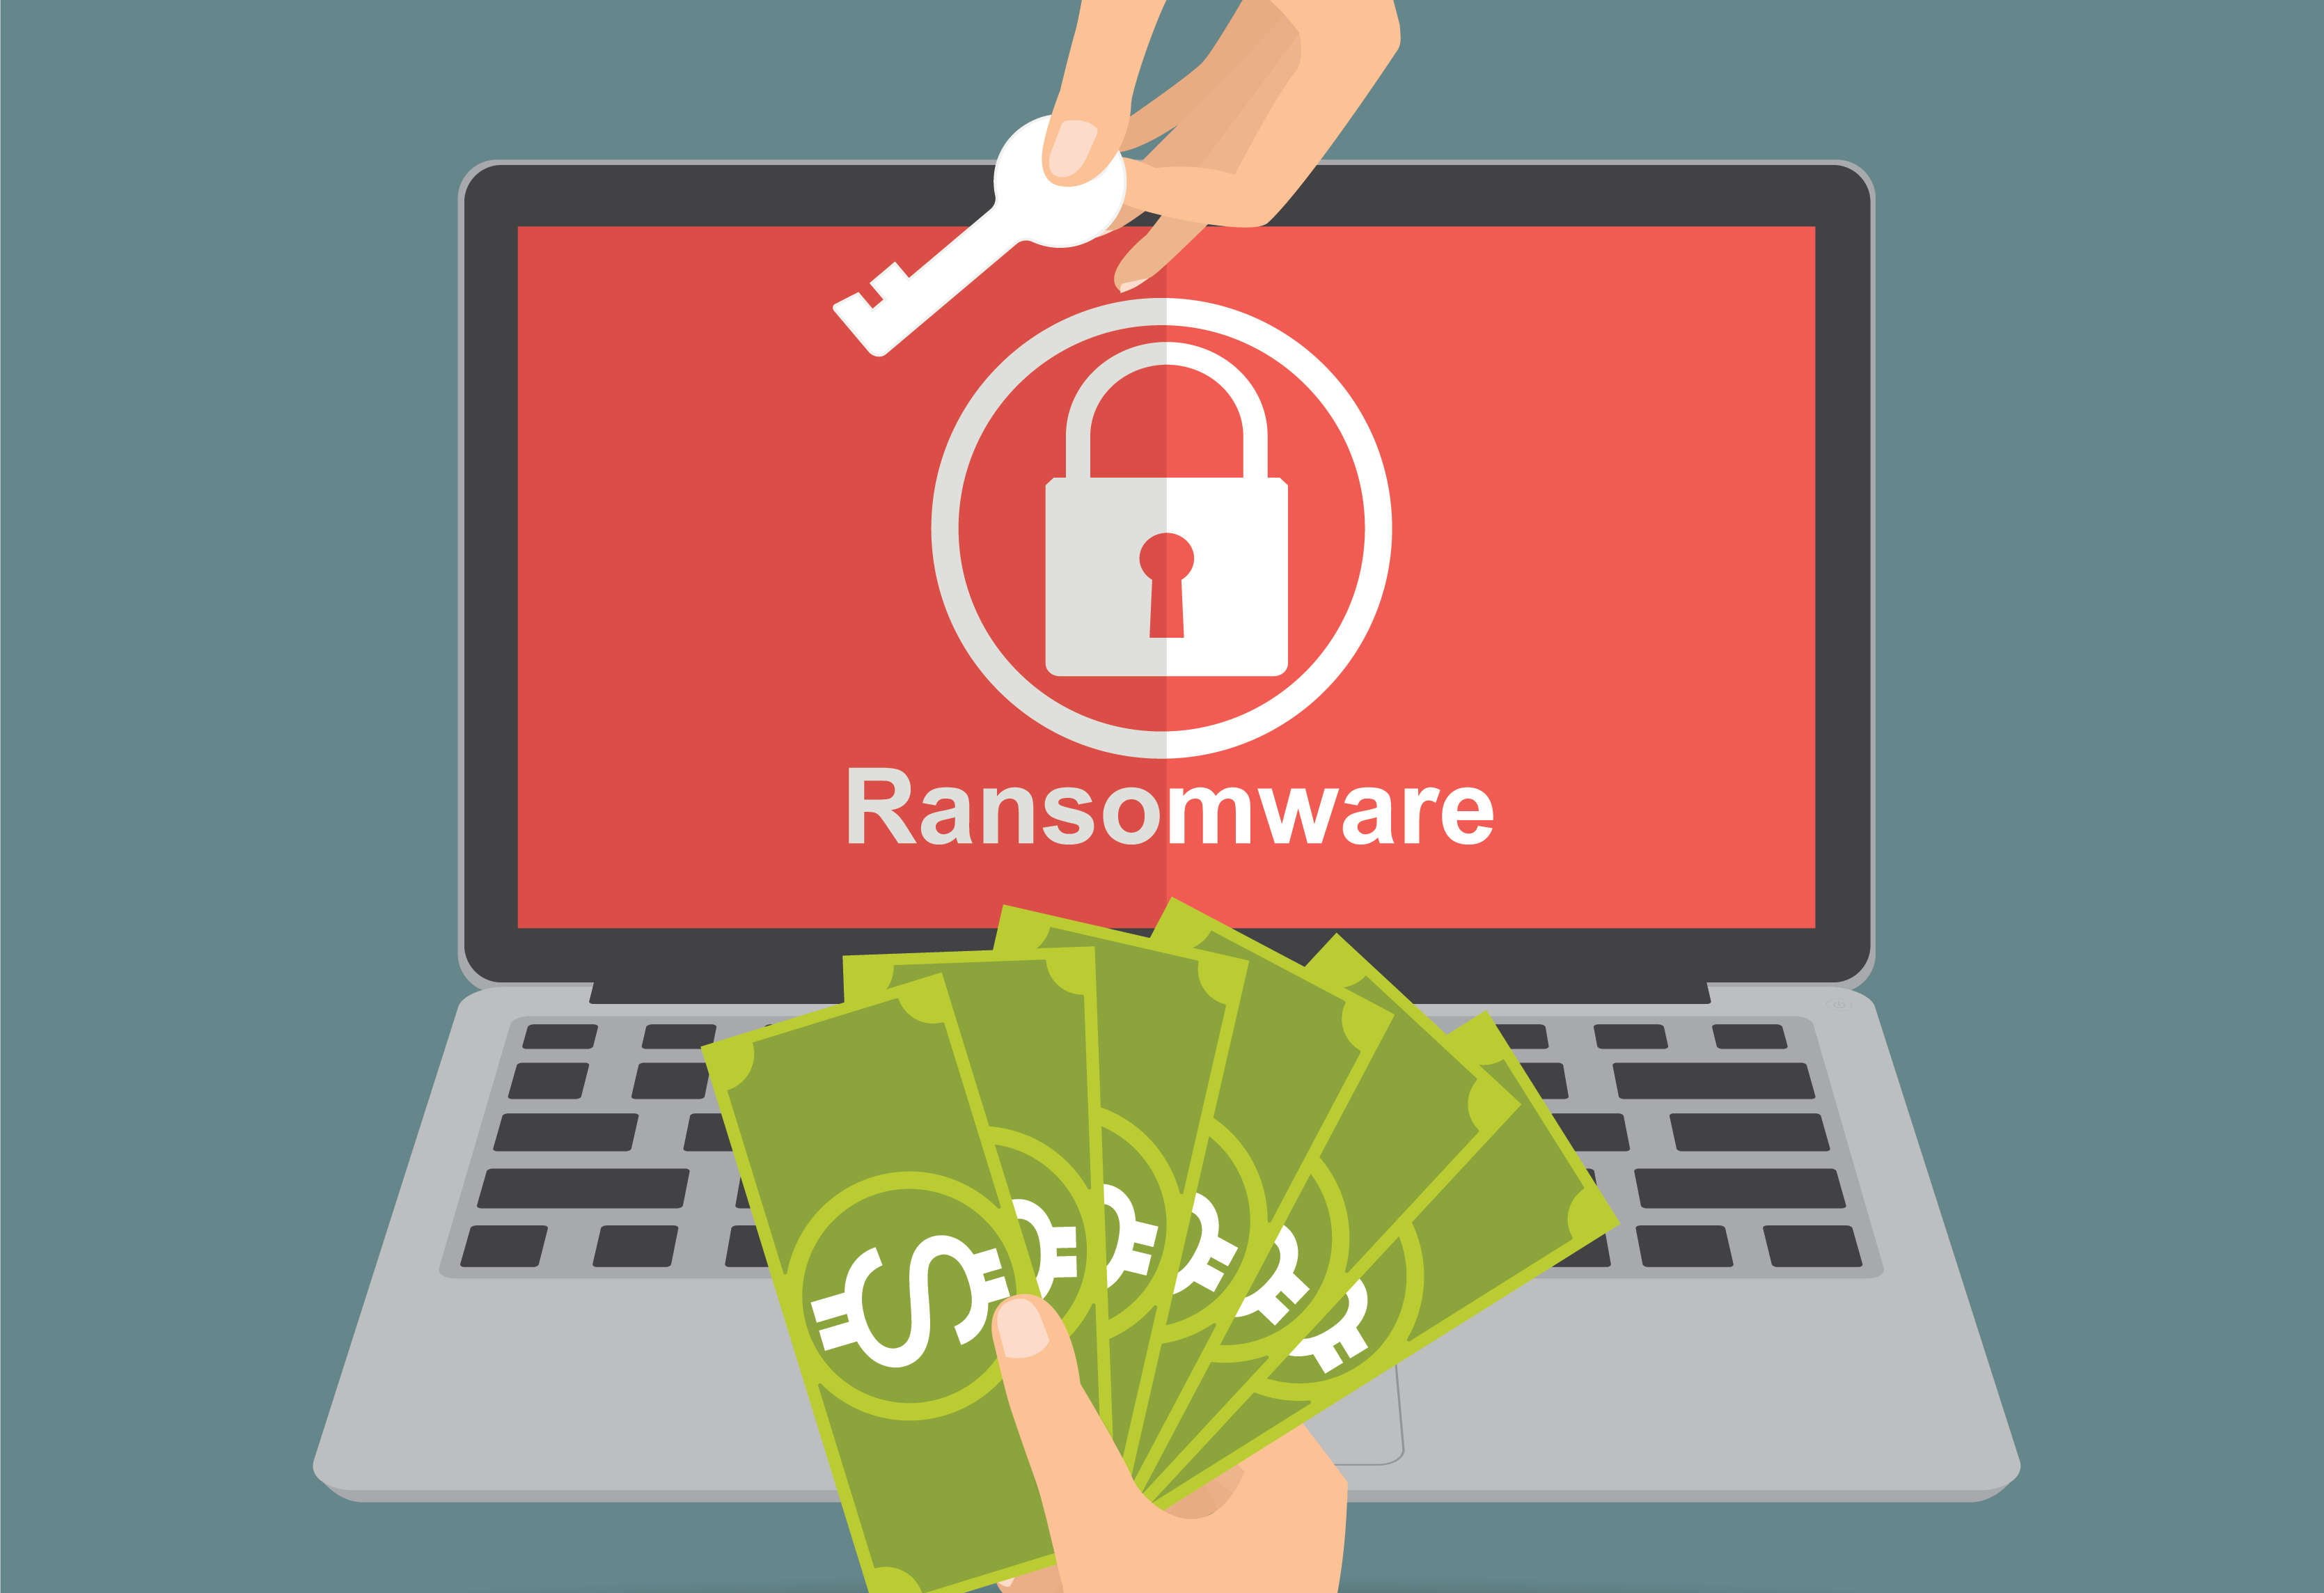 Microsoft, McAfee and many others are part of newly formed anti-ransomware coalition